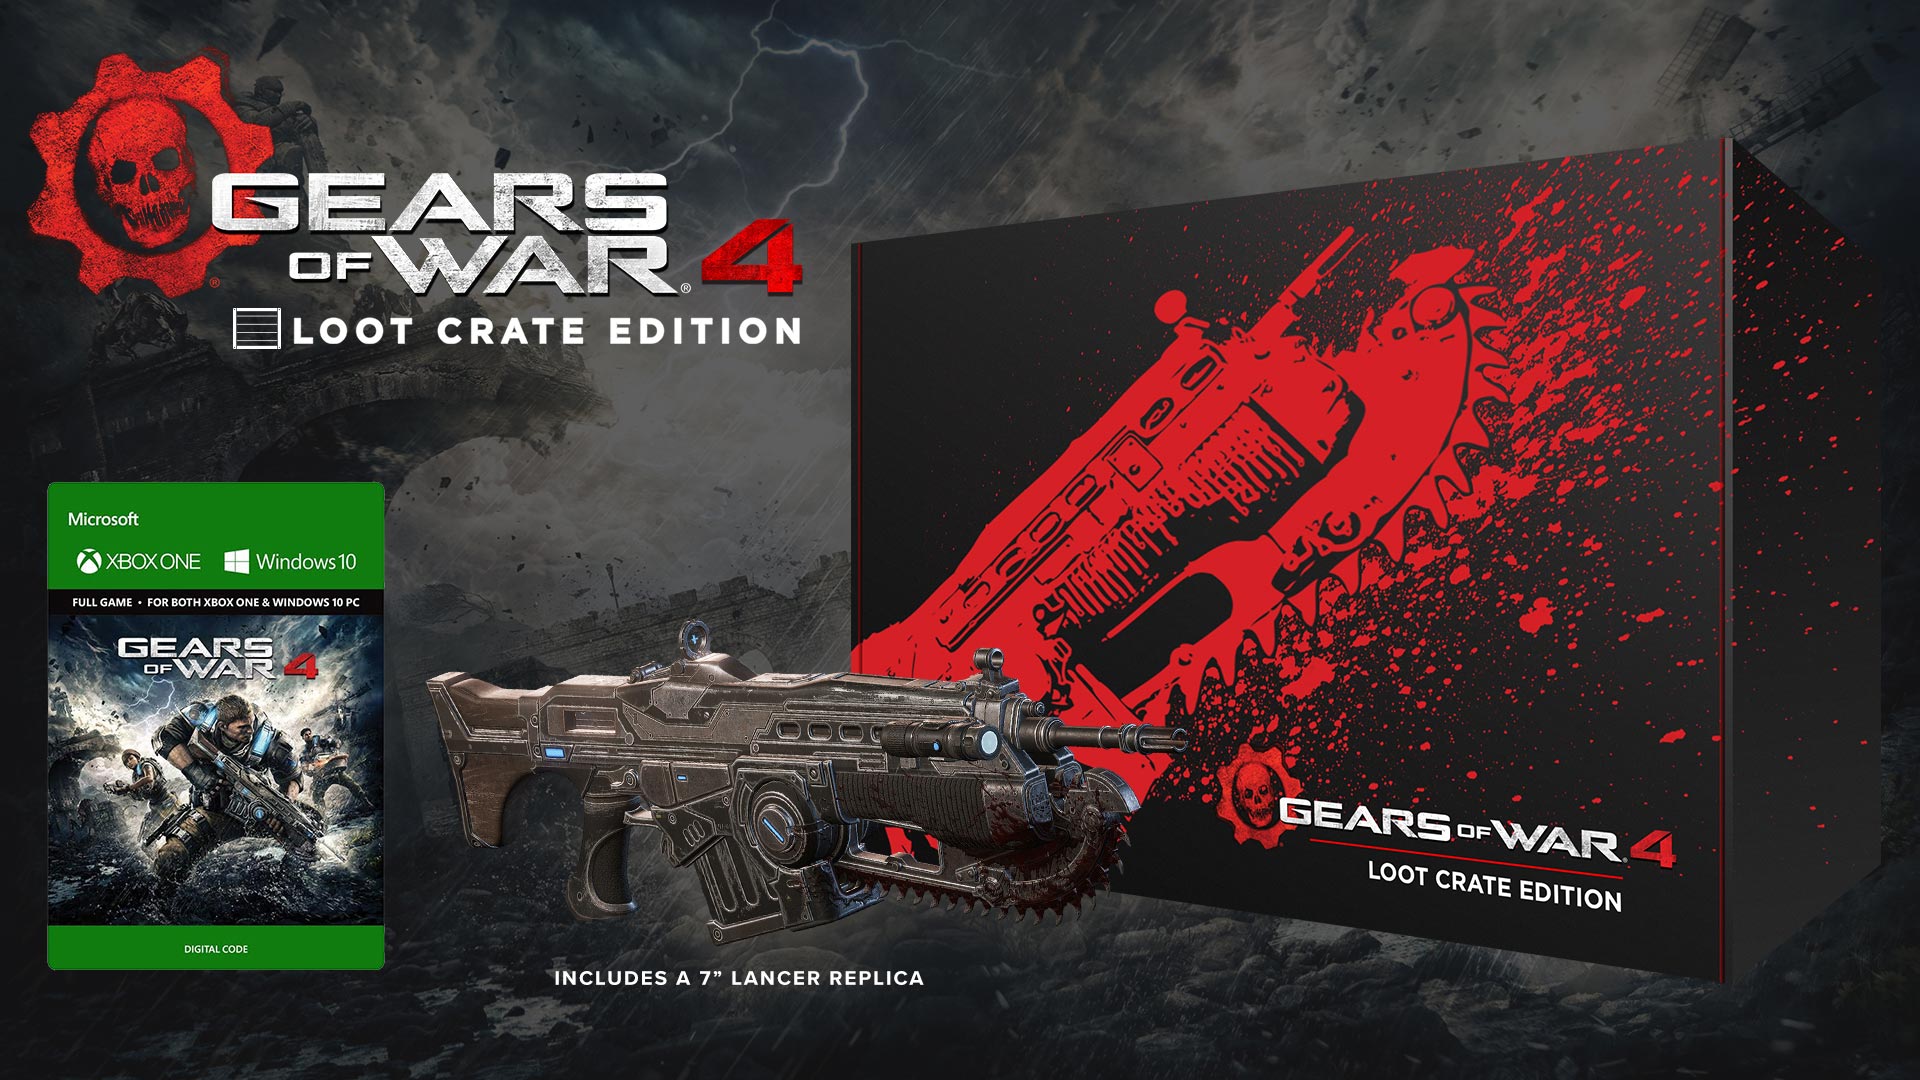 Gears of War 4: Loot Crate Edition Read more at http://news.xbox.com/2016/07/12/get-cog-supply-drop-gears-war-4-loot-crate-edition-coming/#i0rbQzWVGOo1xy3F.99